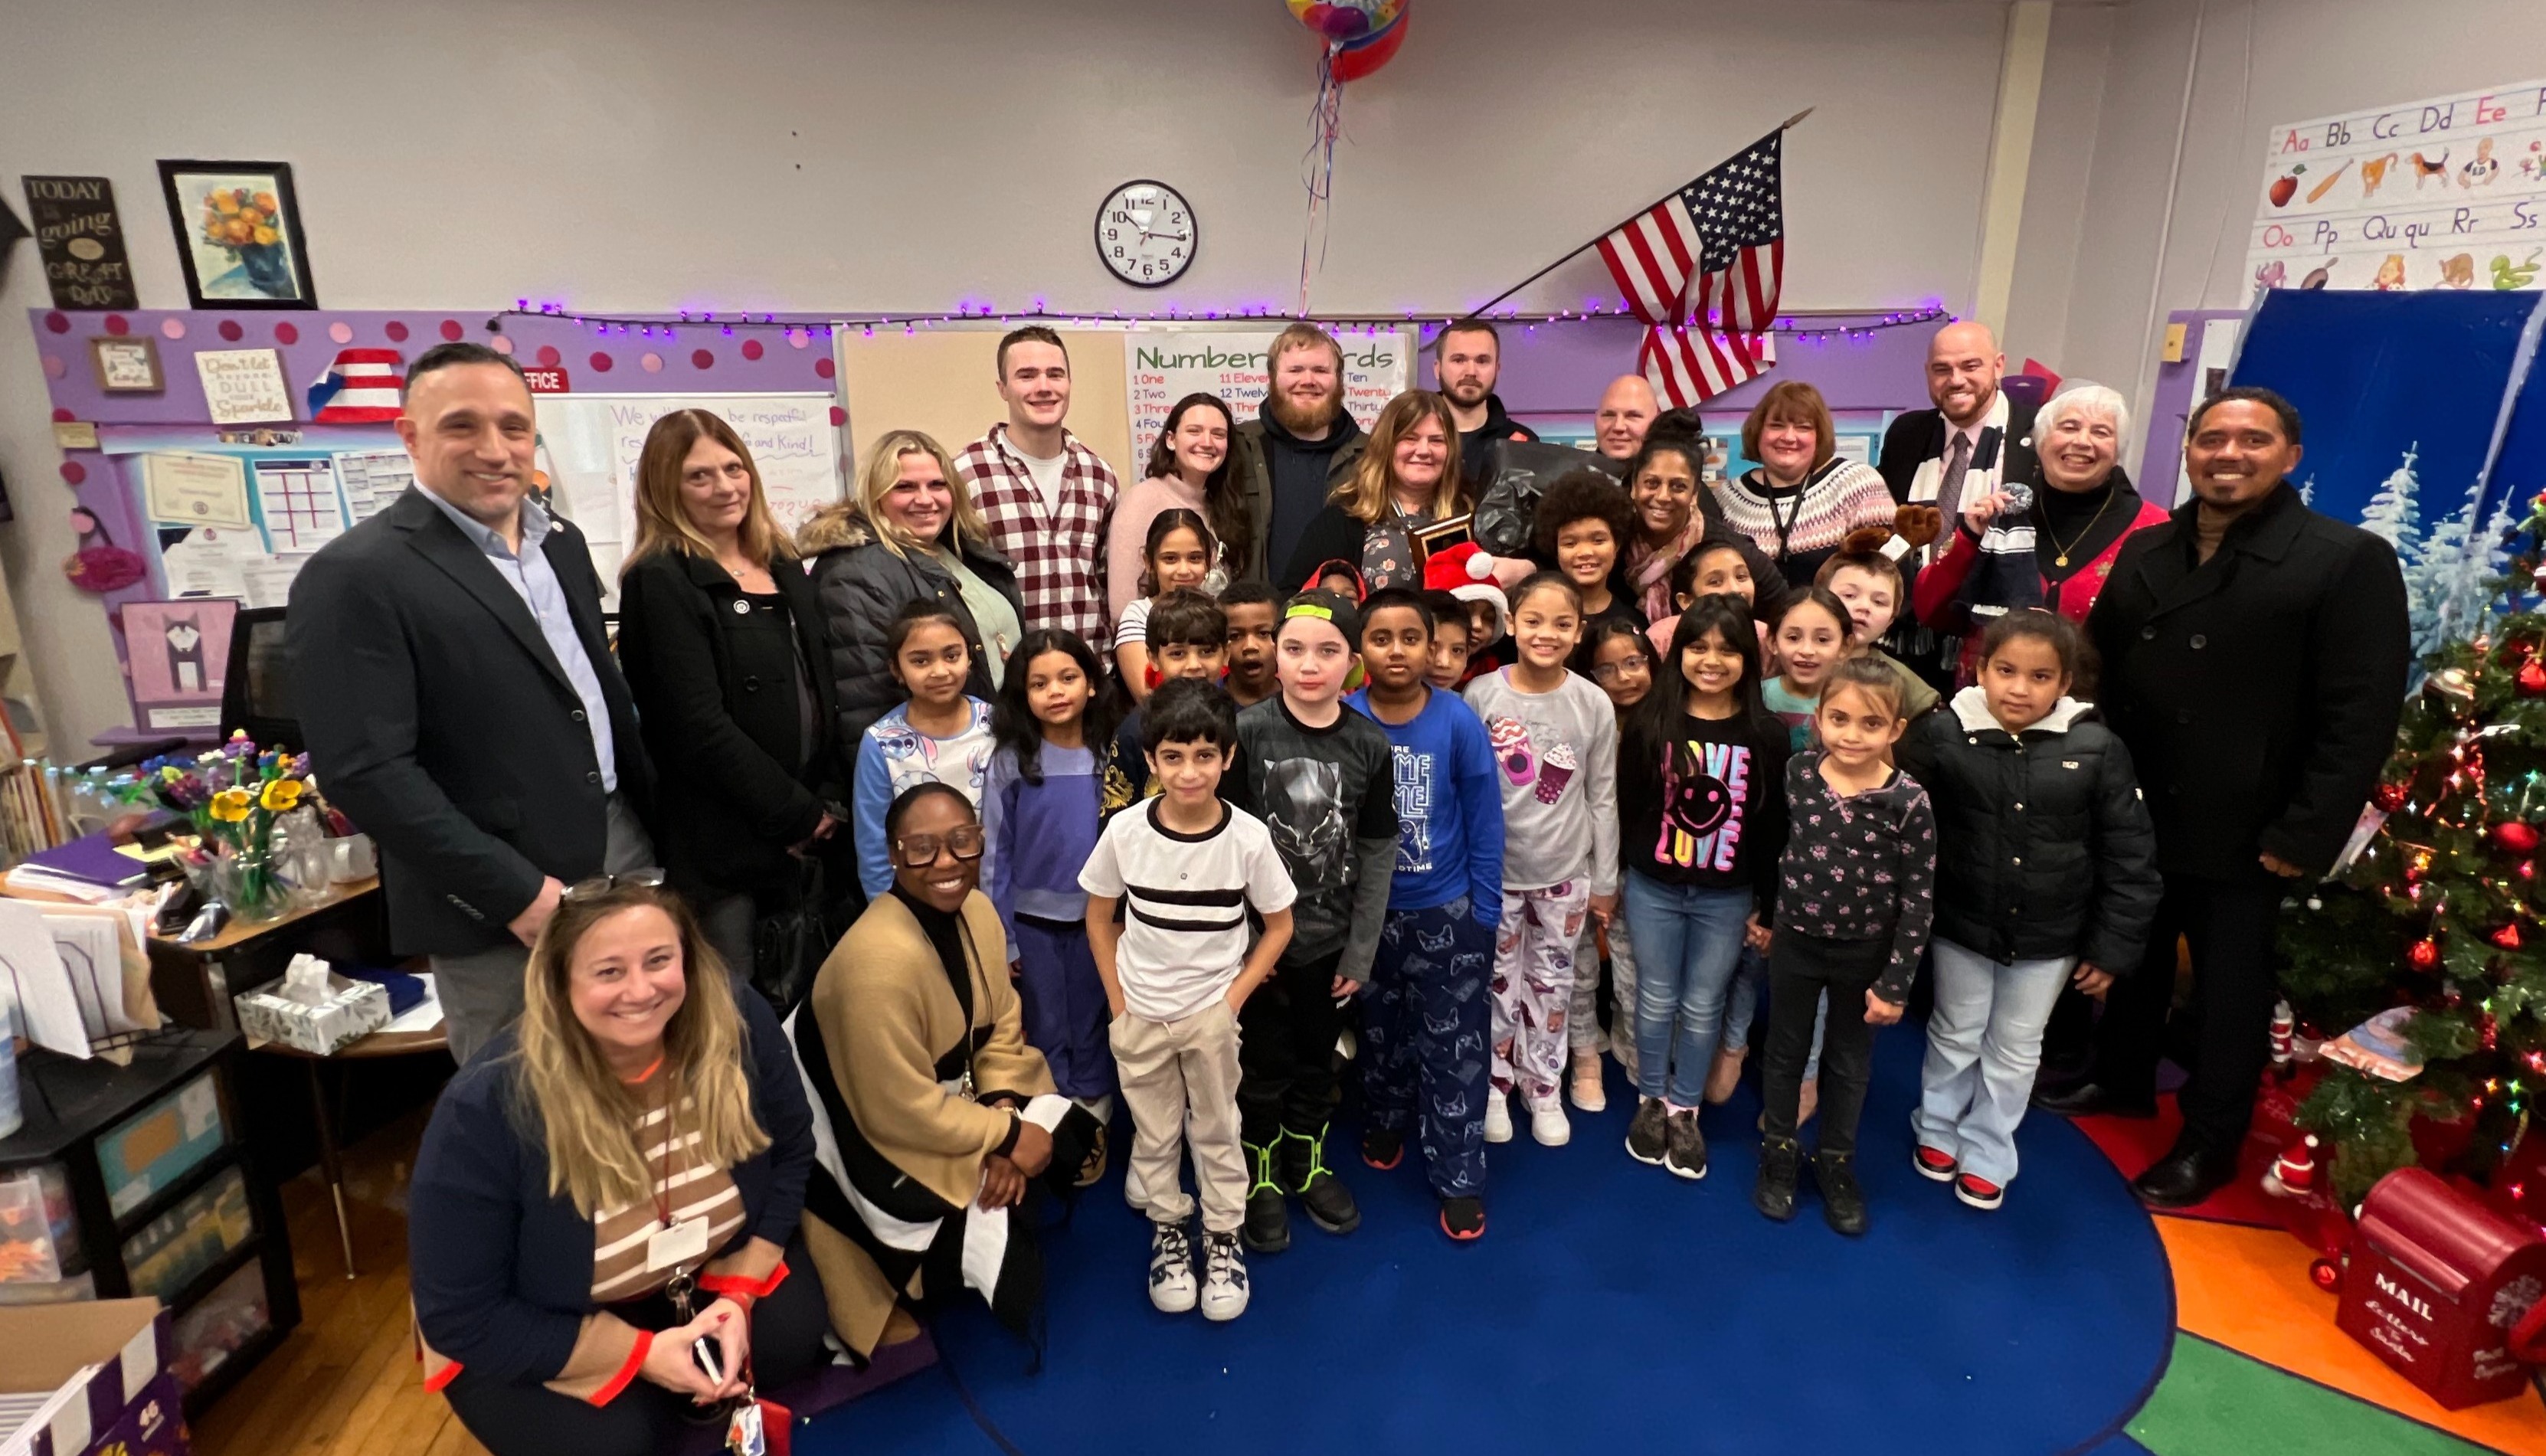 Teacher of the year group photo with students and family